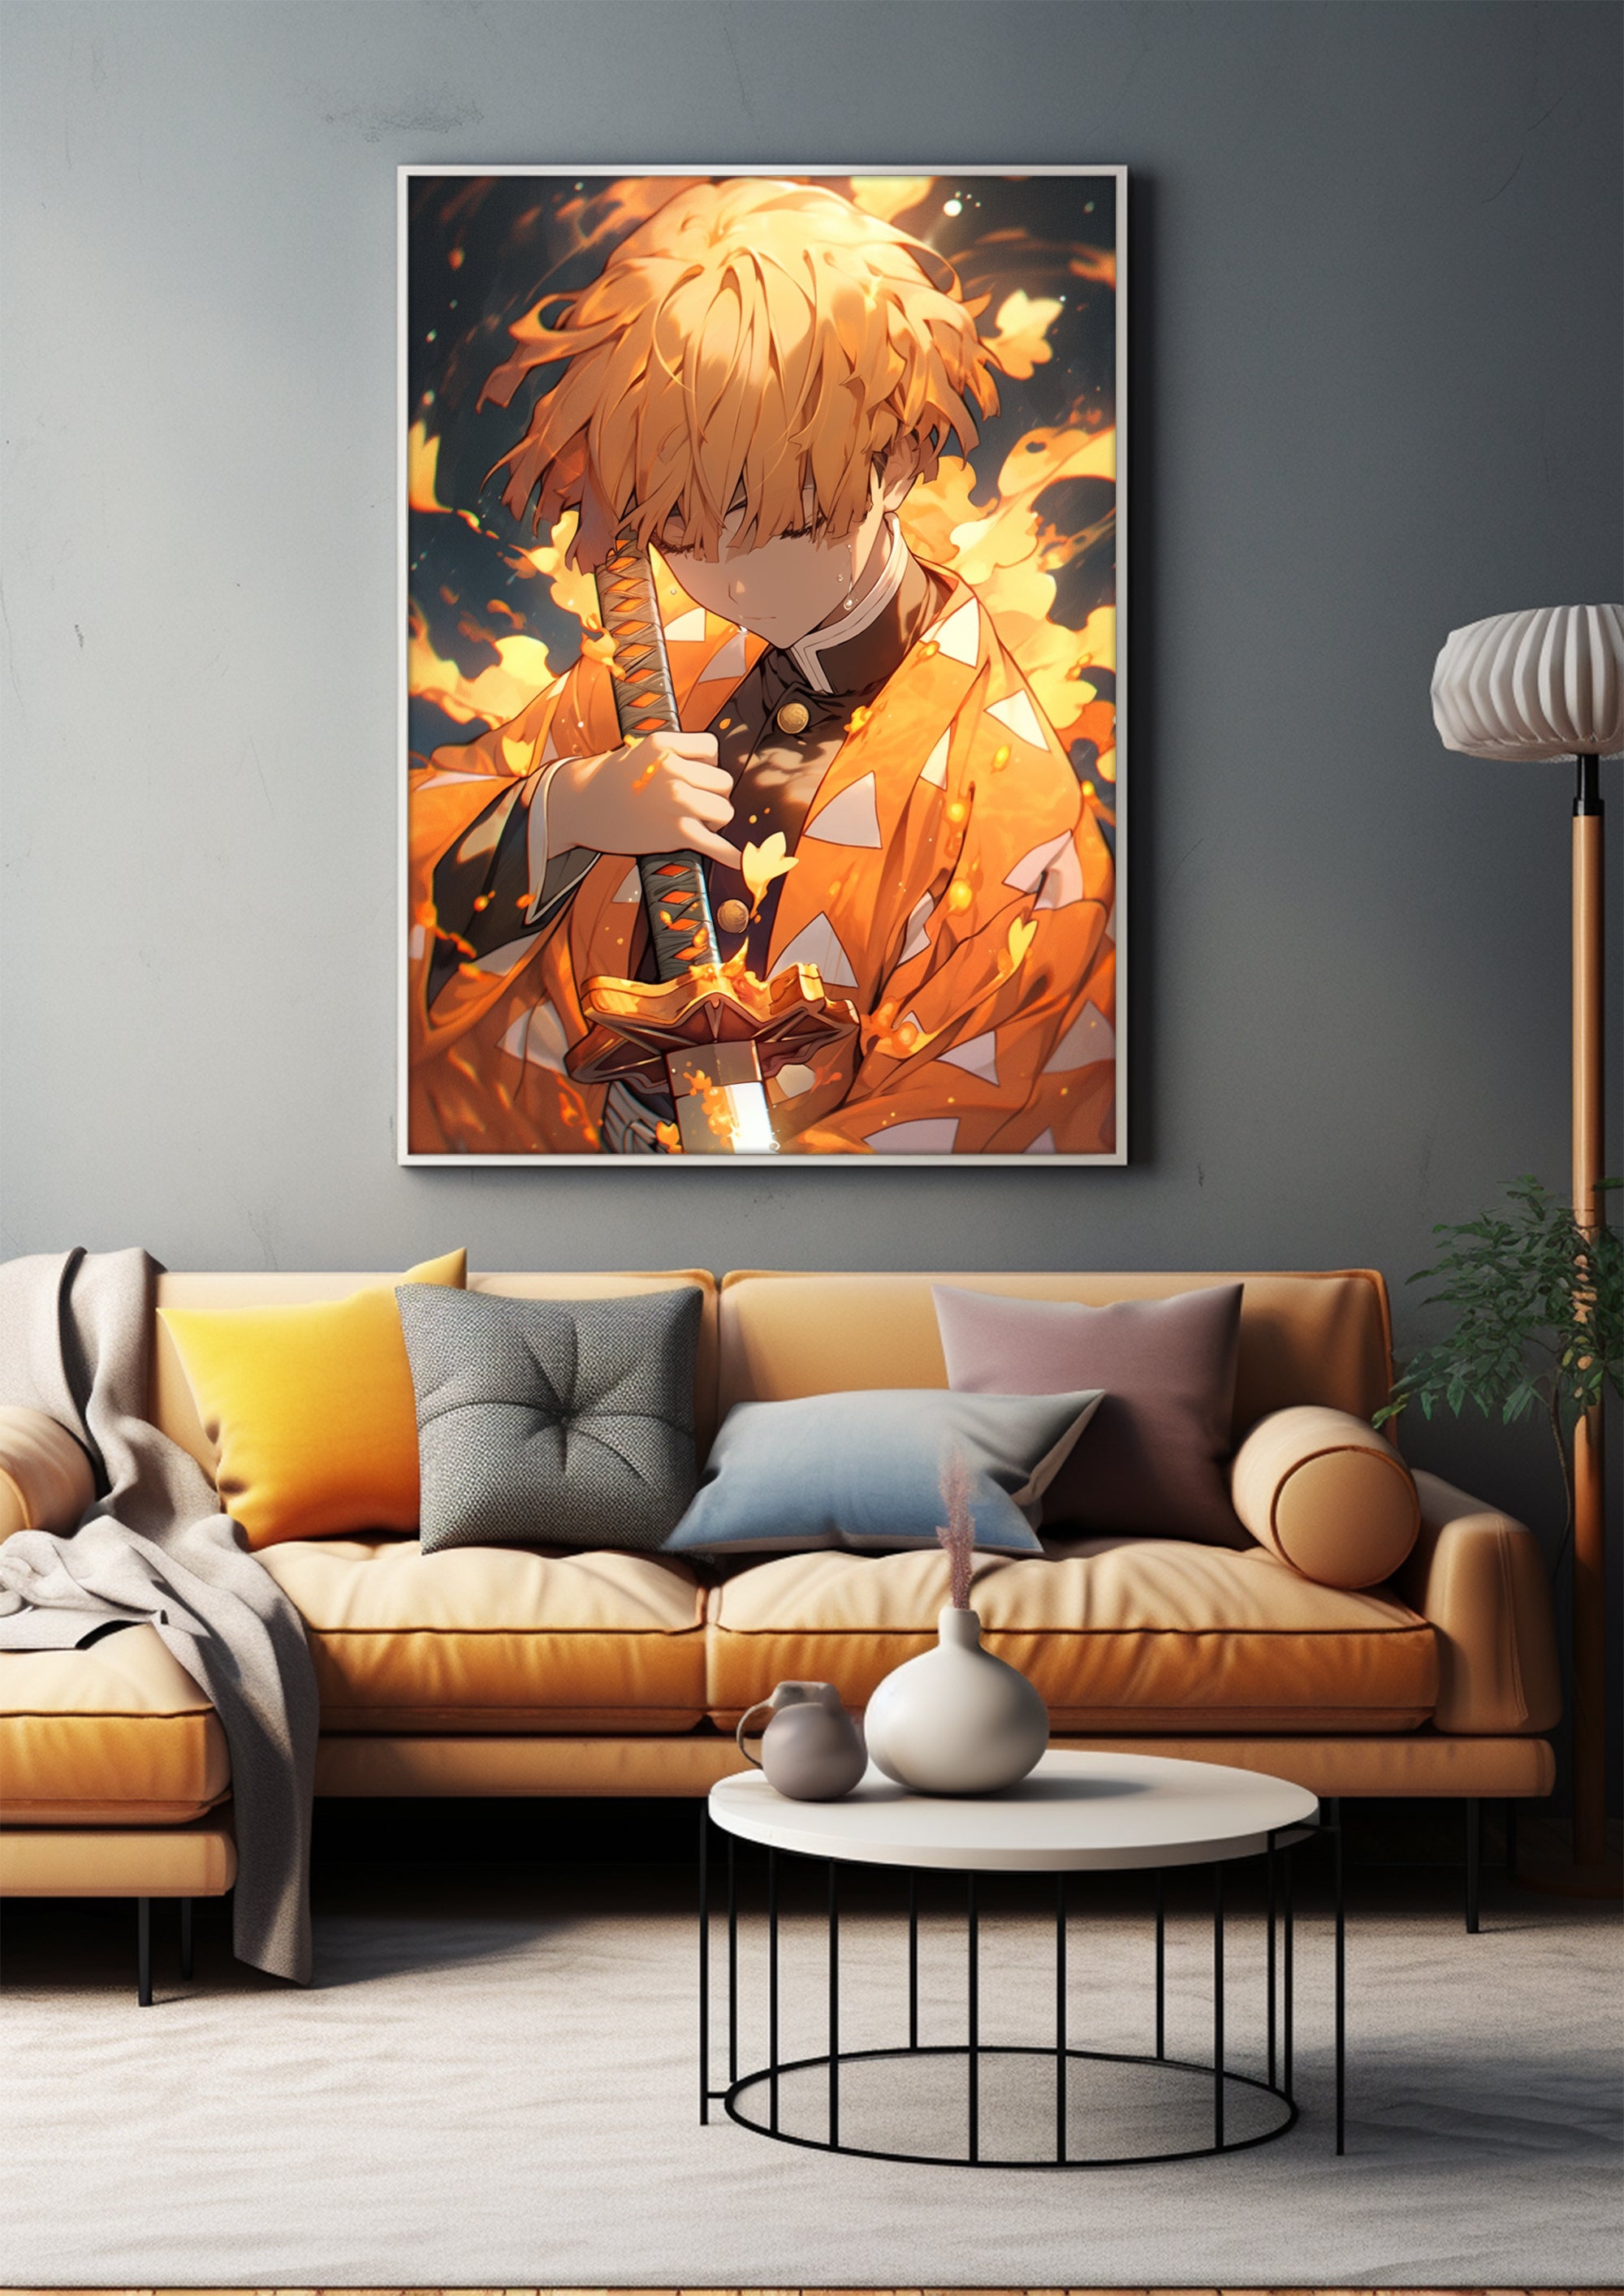 Anime Poster | Character Concept Wall Art Decor |Wall art print |Demon Slayer|Wallpapers，Cell phone screen wallpaper， game room, industrial decor，Art Deco Wall Gifts|PRINTABLE Art |Digital Download